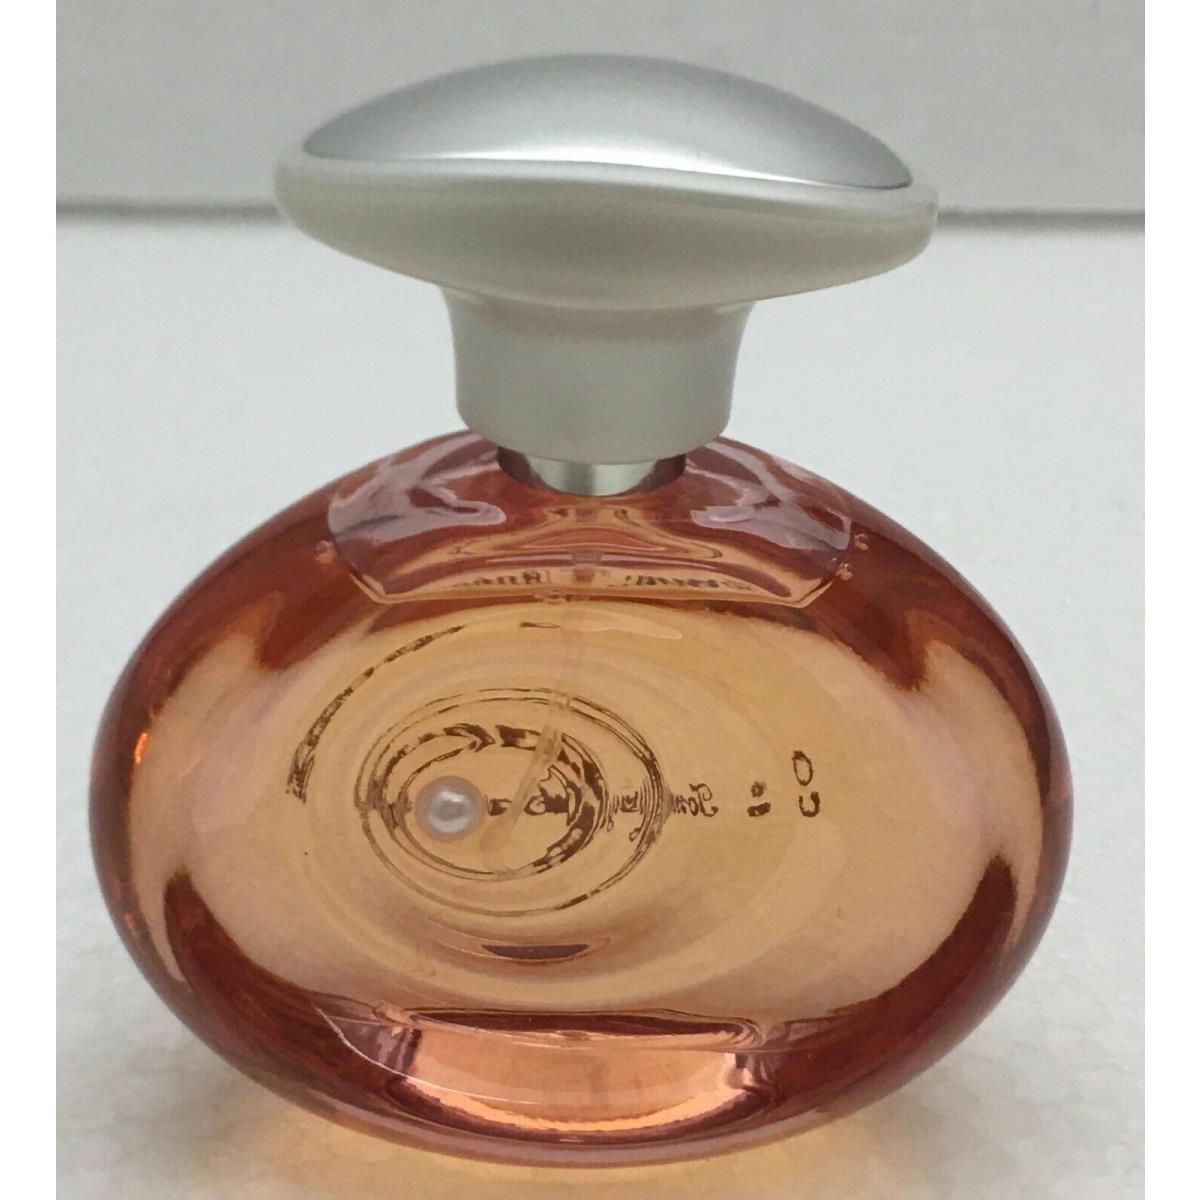 Tommy Bahama For Her 3.4oz/100ml Edp Spray See Details